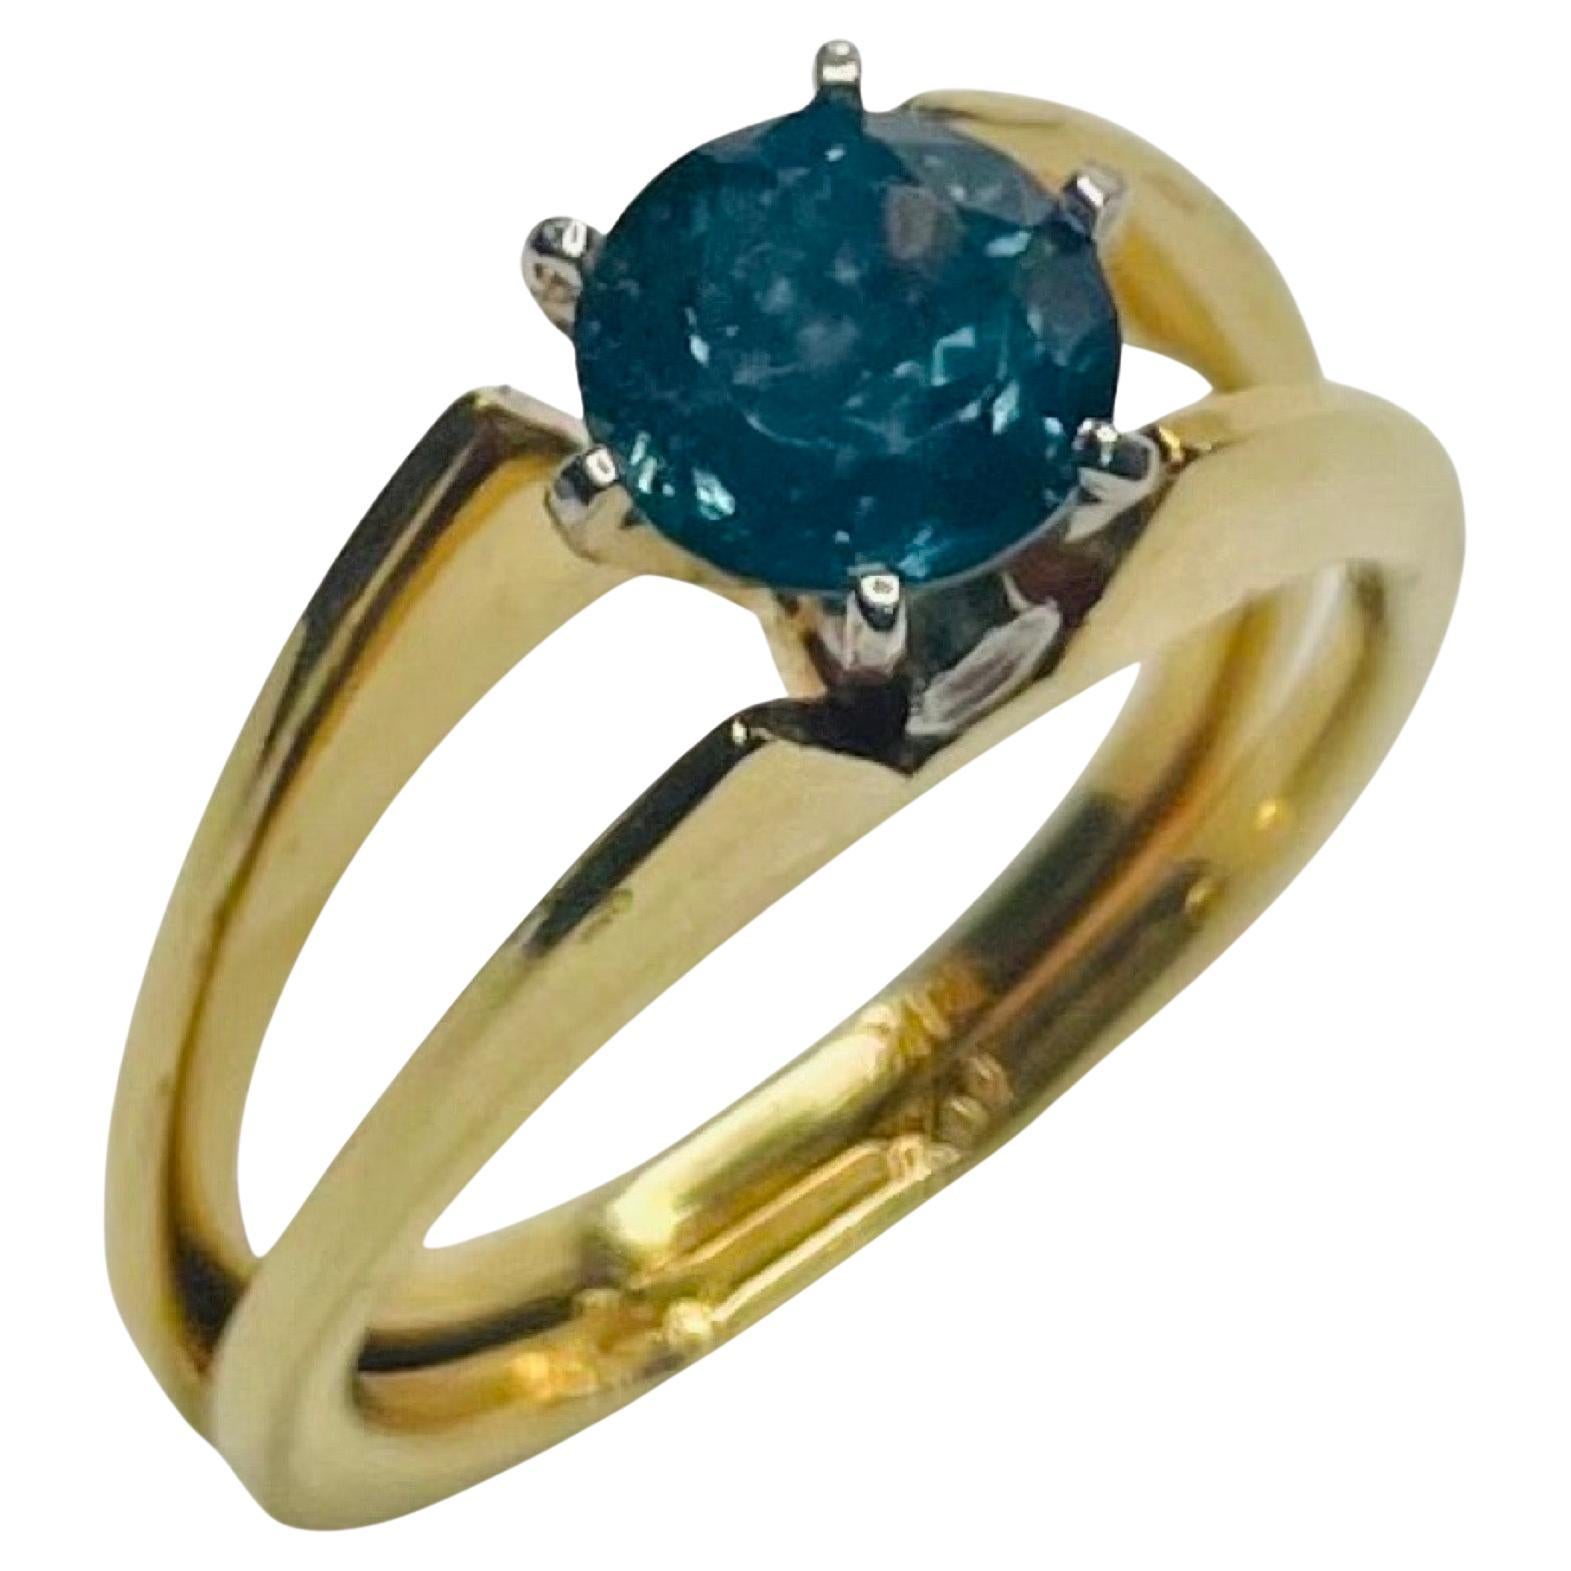 Lithos 18K Yellow Gold, Platinum, and Montana Sapphire Ring